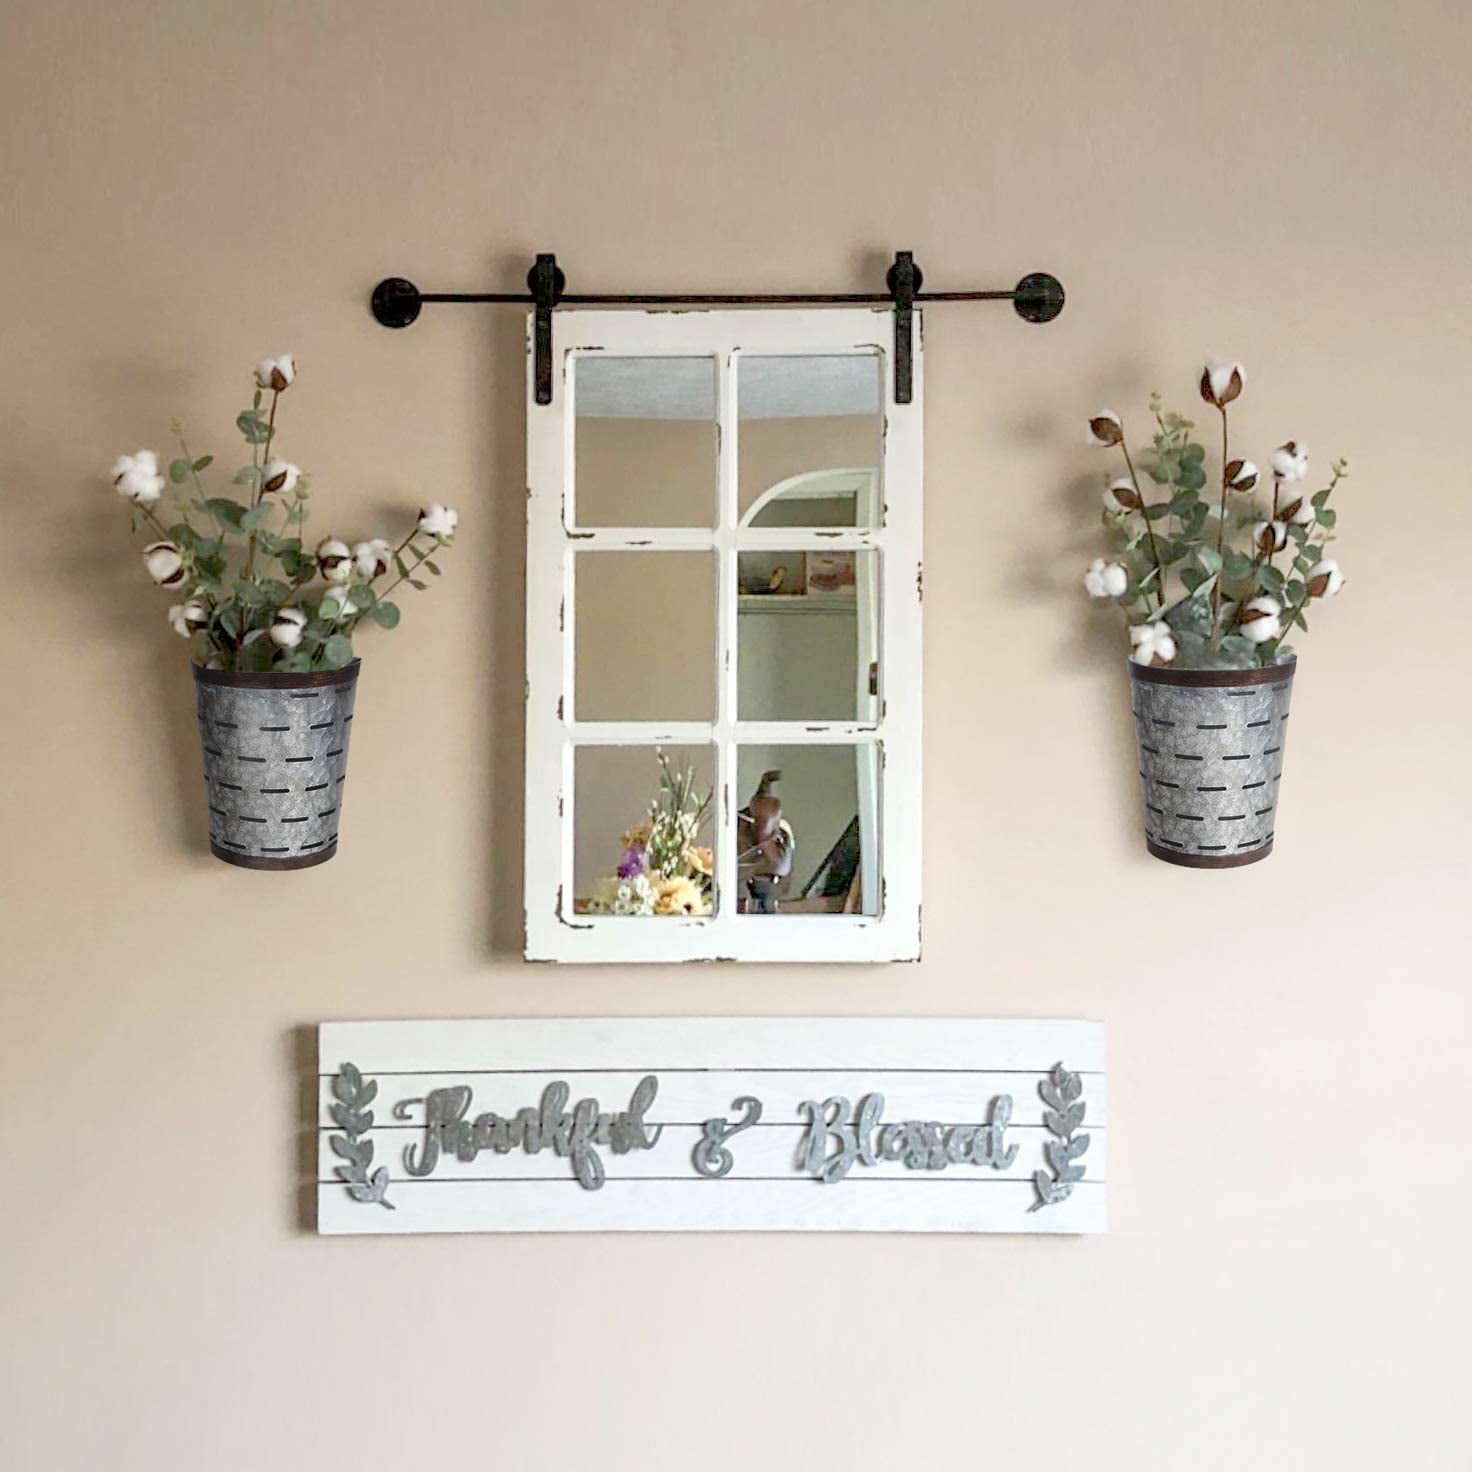 Vase Planters Galvanized Metal Wall Farmhouse Style Hanging Home Wall Decor